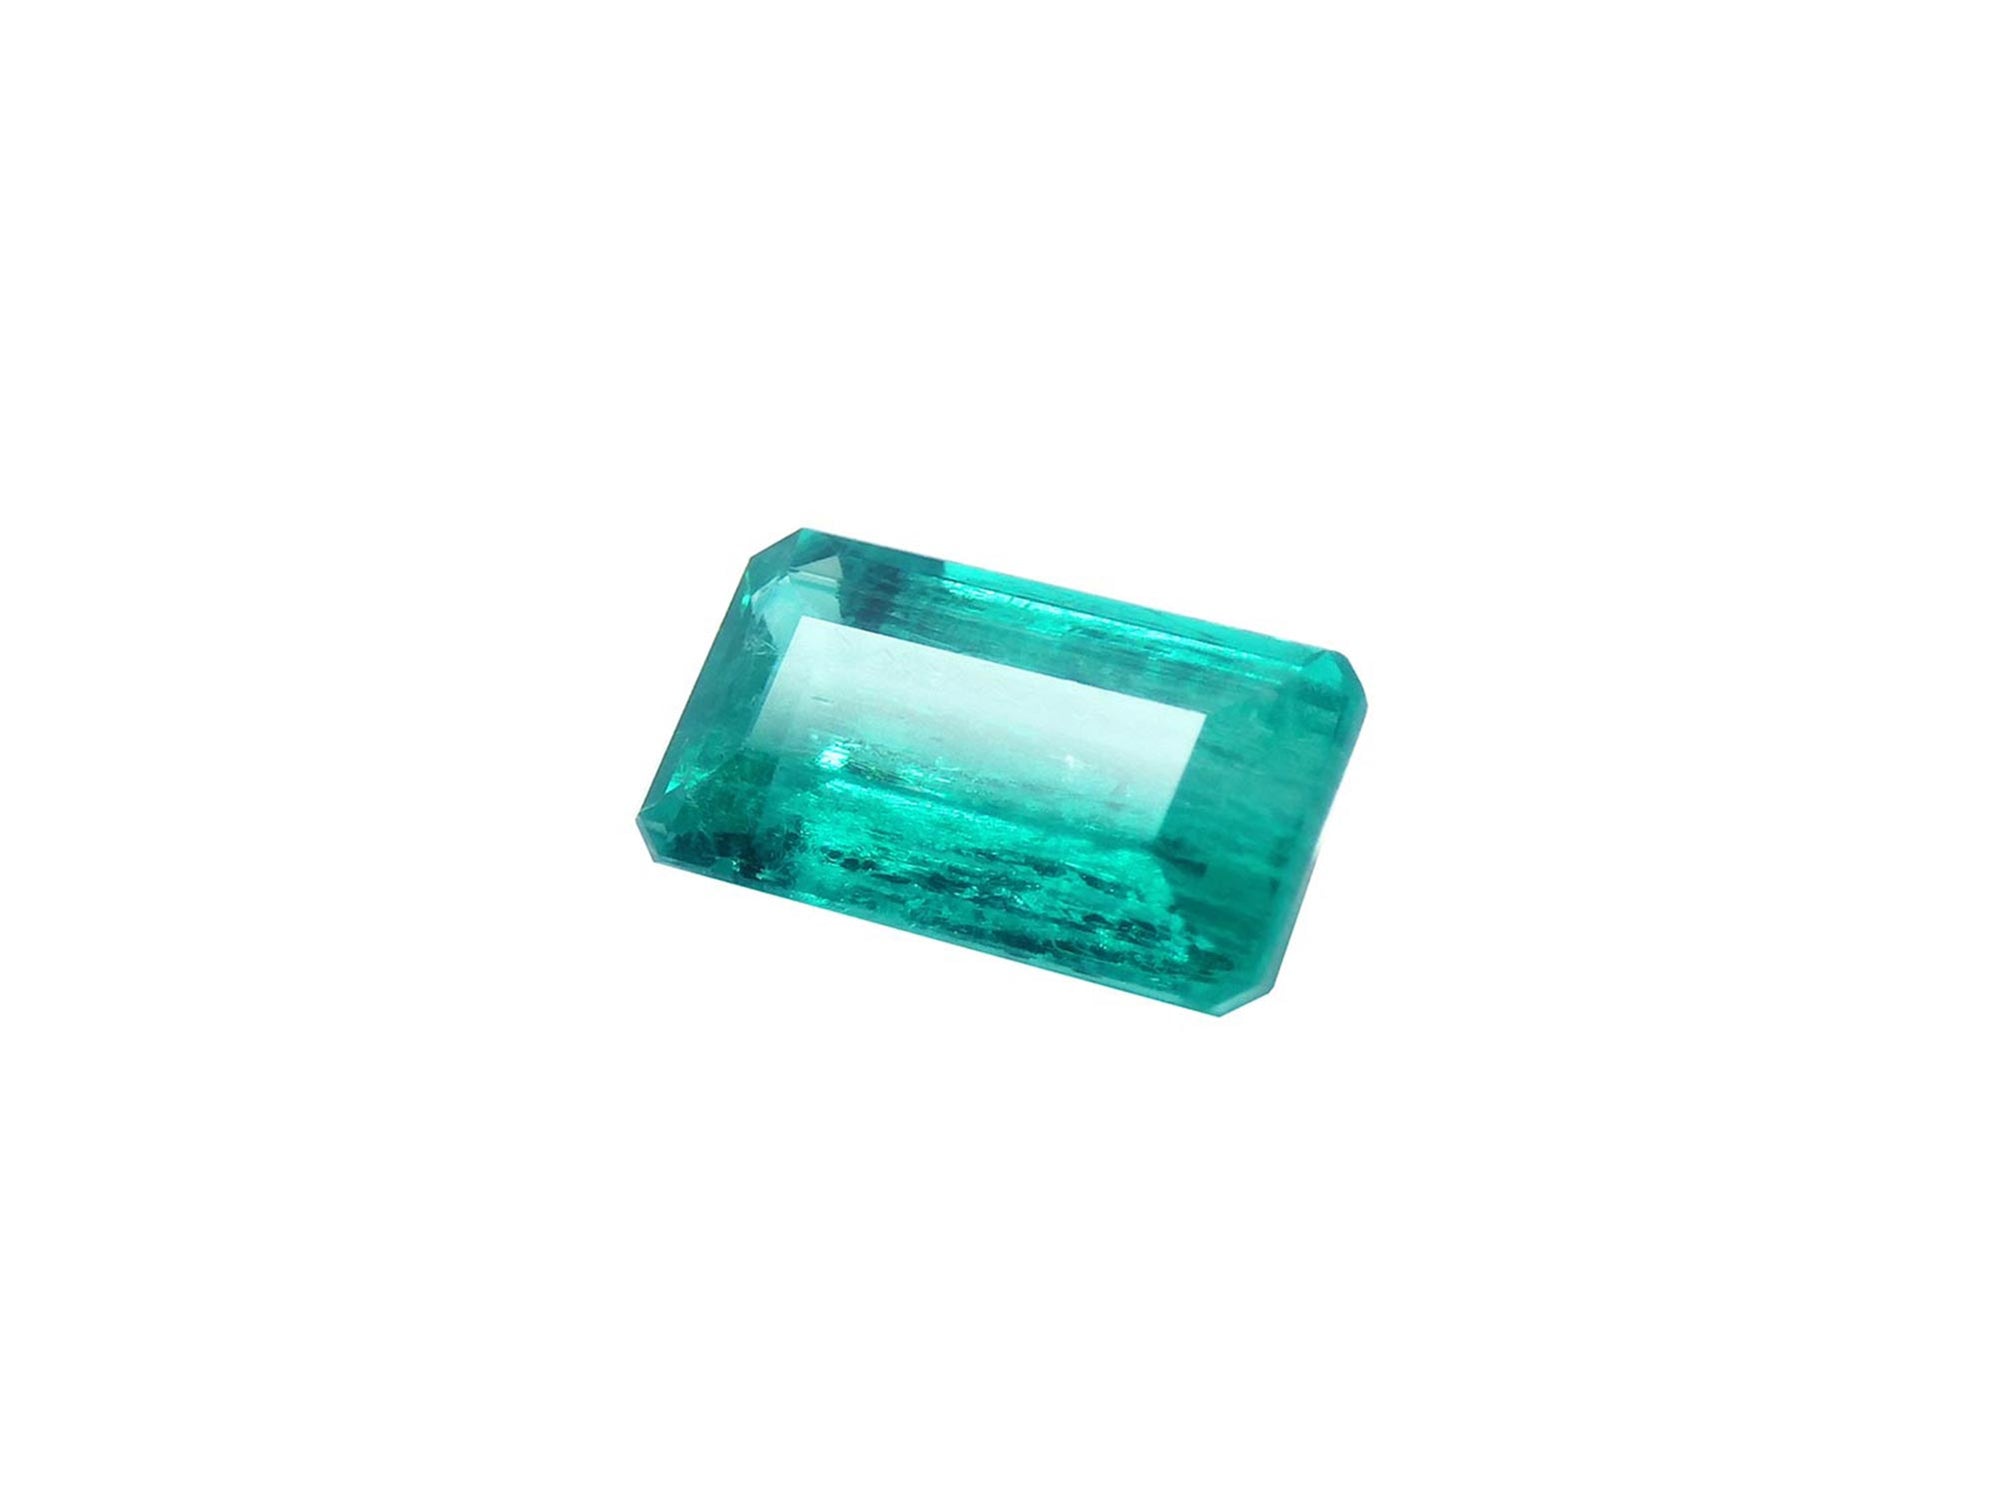 Colombian emerald for sale